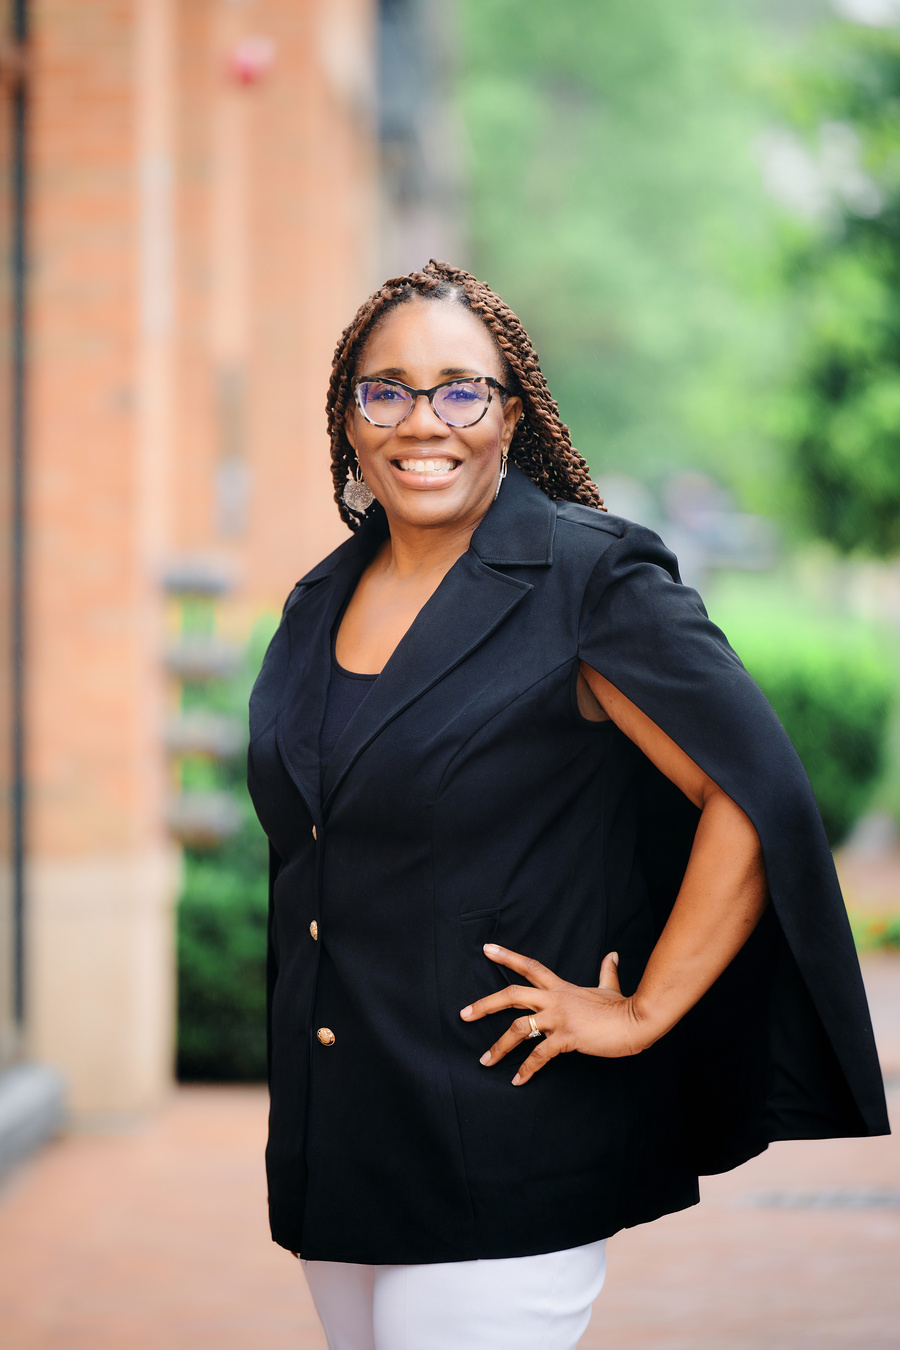 Dr. Linda McGhee, a black woman, is smiling while wearing glasses and a black blazer